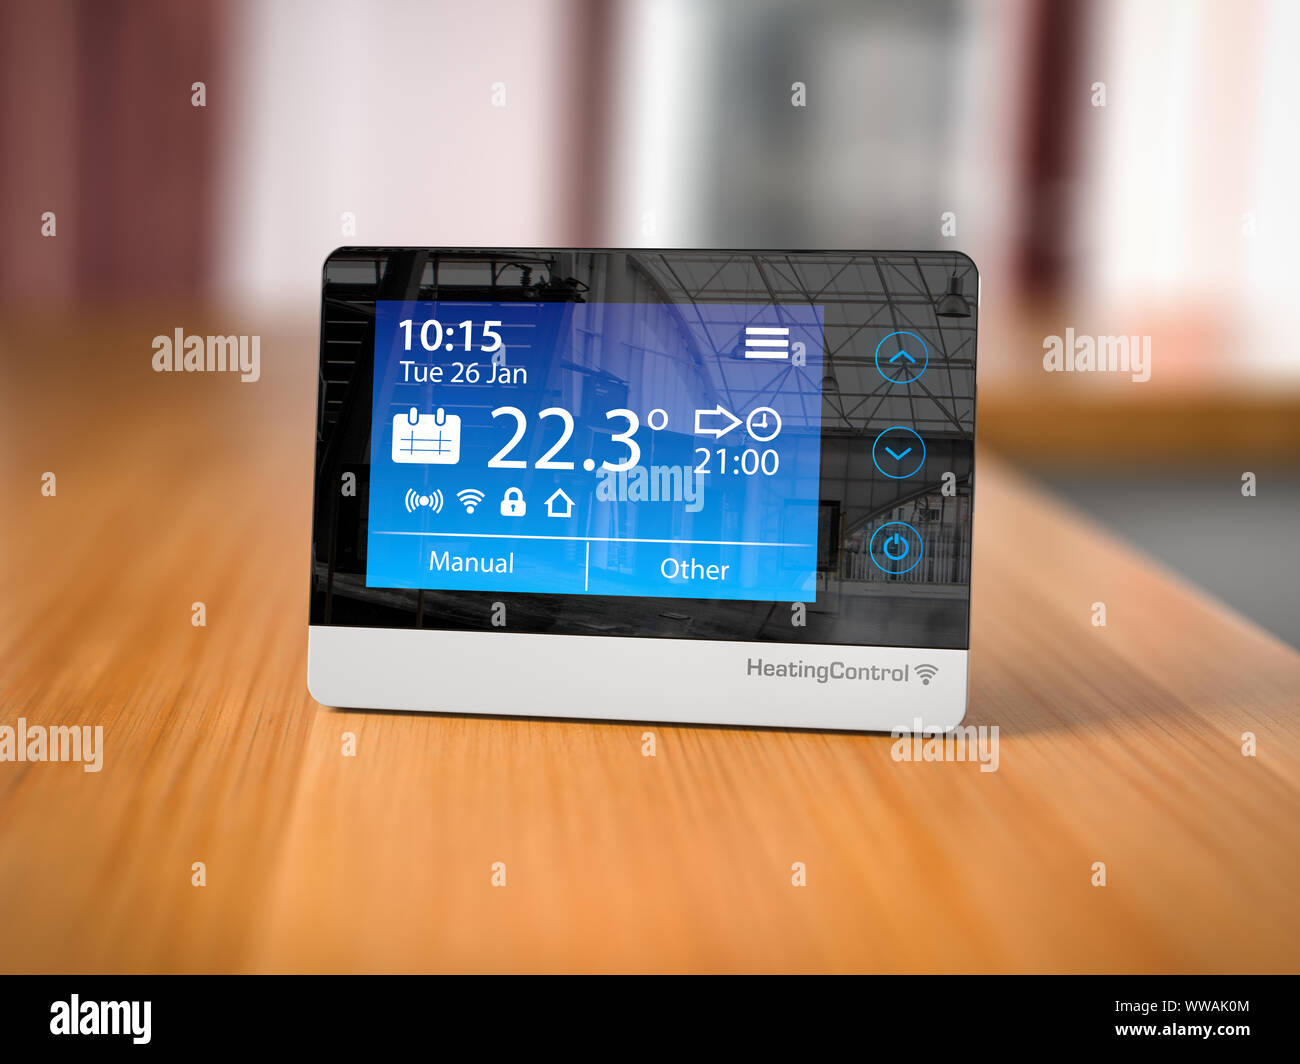 Heating climat control  in home concept. Programmable thermostat on the table in room. 3d illustration Stock Photo